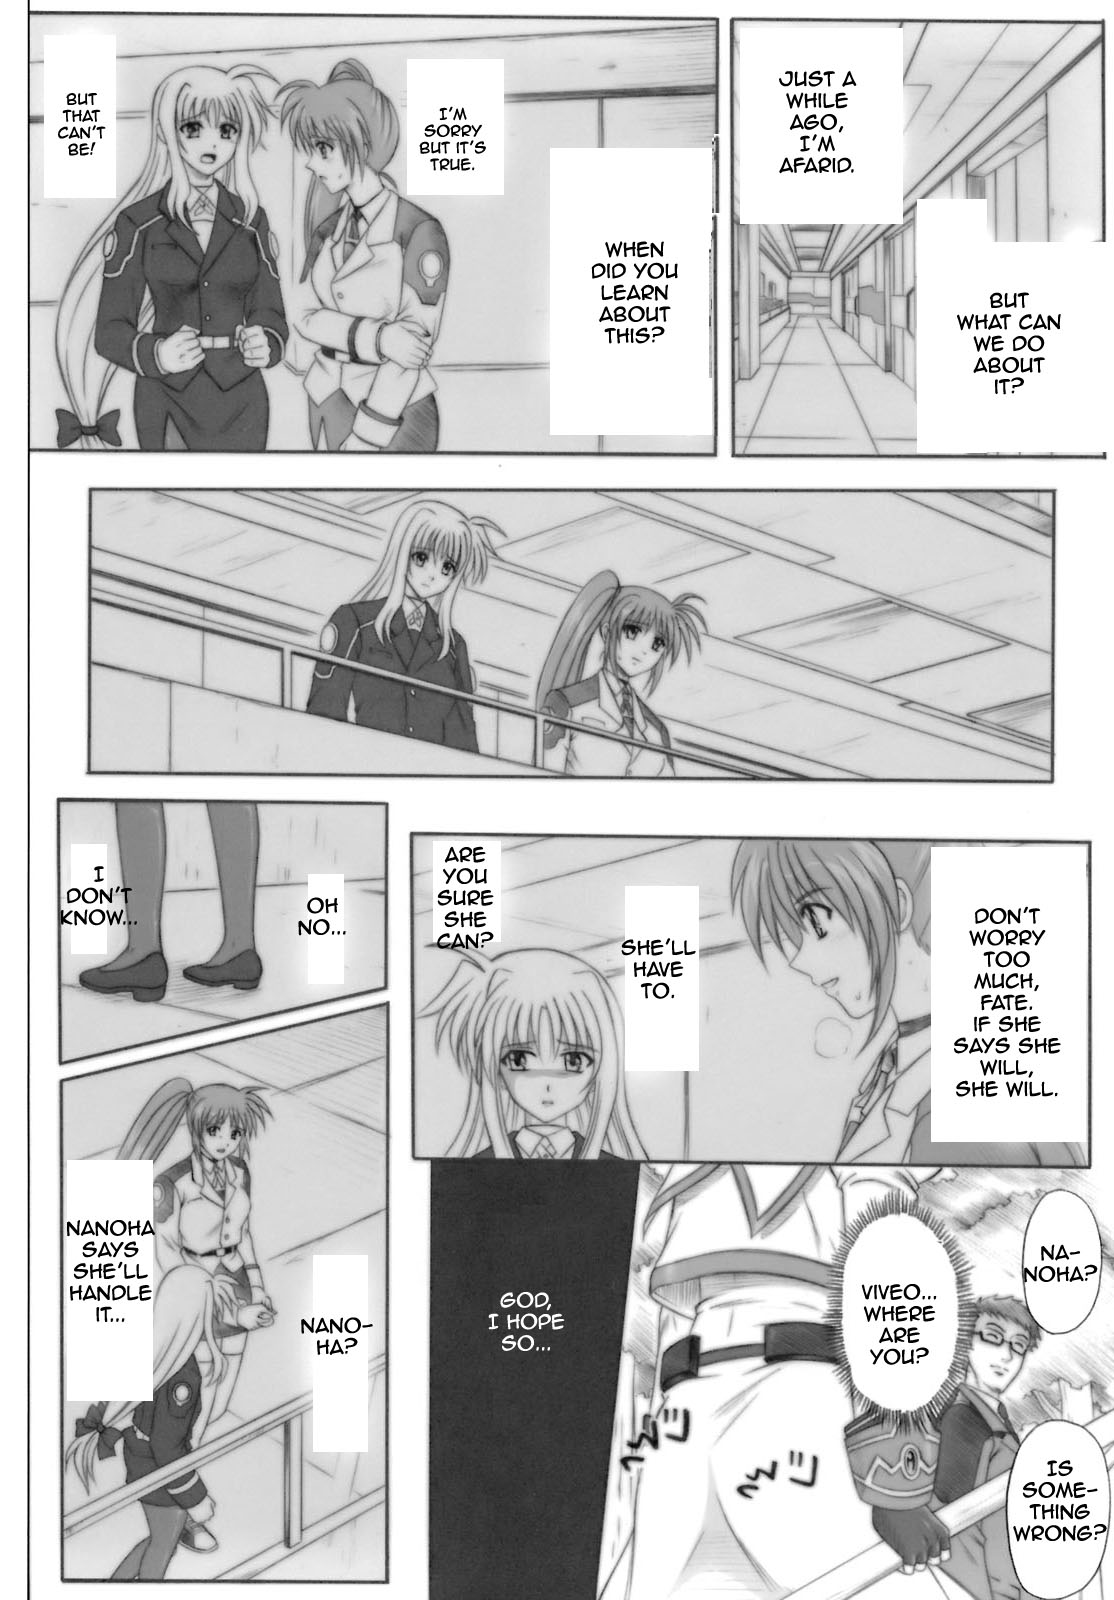 840 Color Classic Situation Note Extention (Mahou Shoujo Lyrical Nanoha) [English] [Rewrite] page 16 full